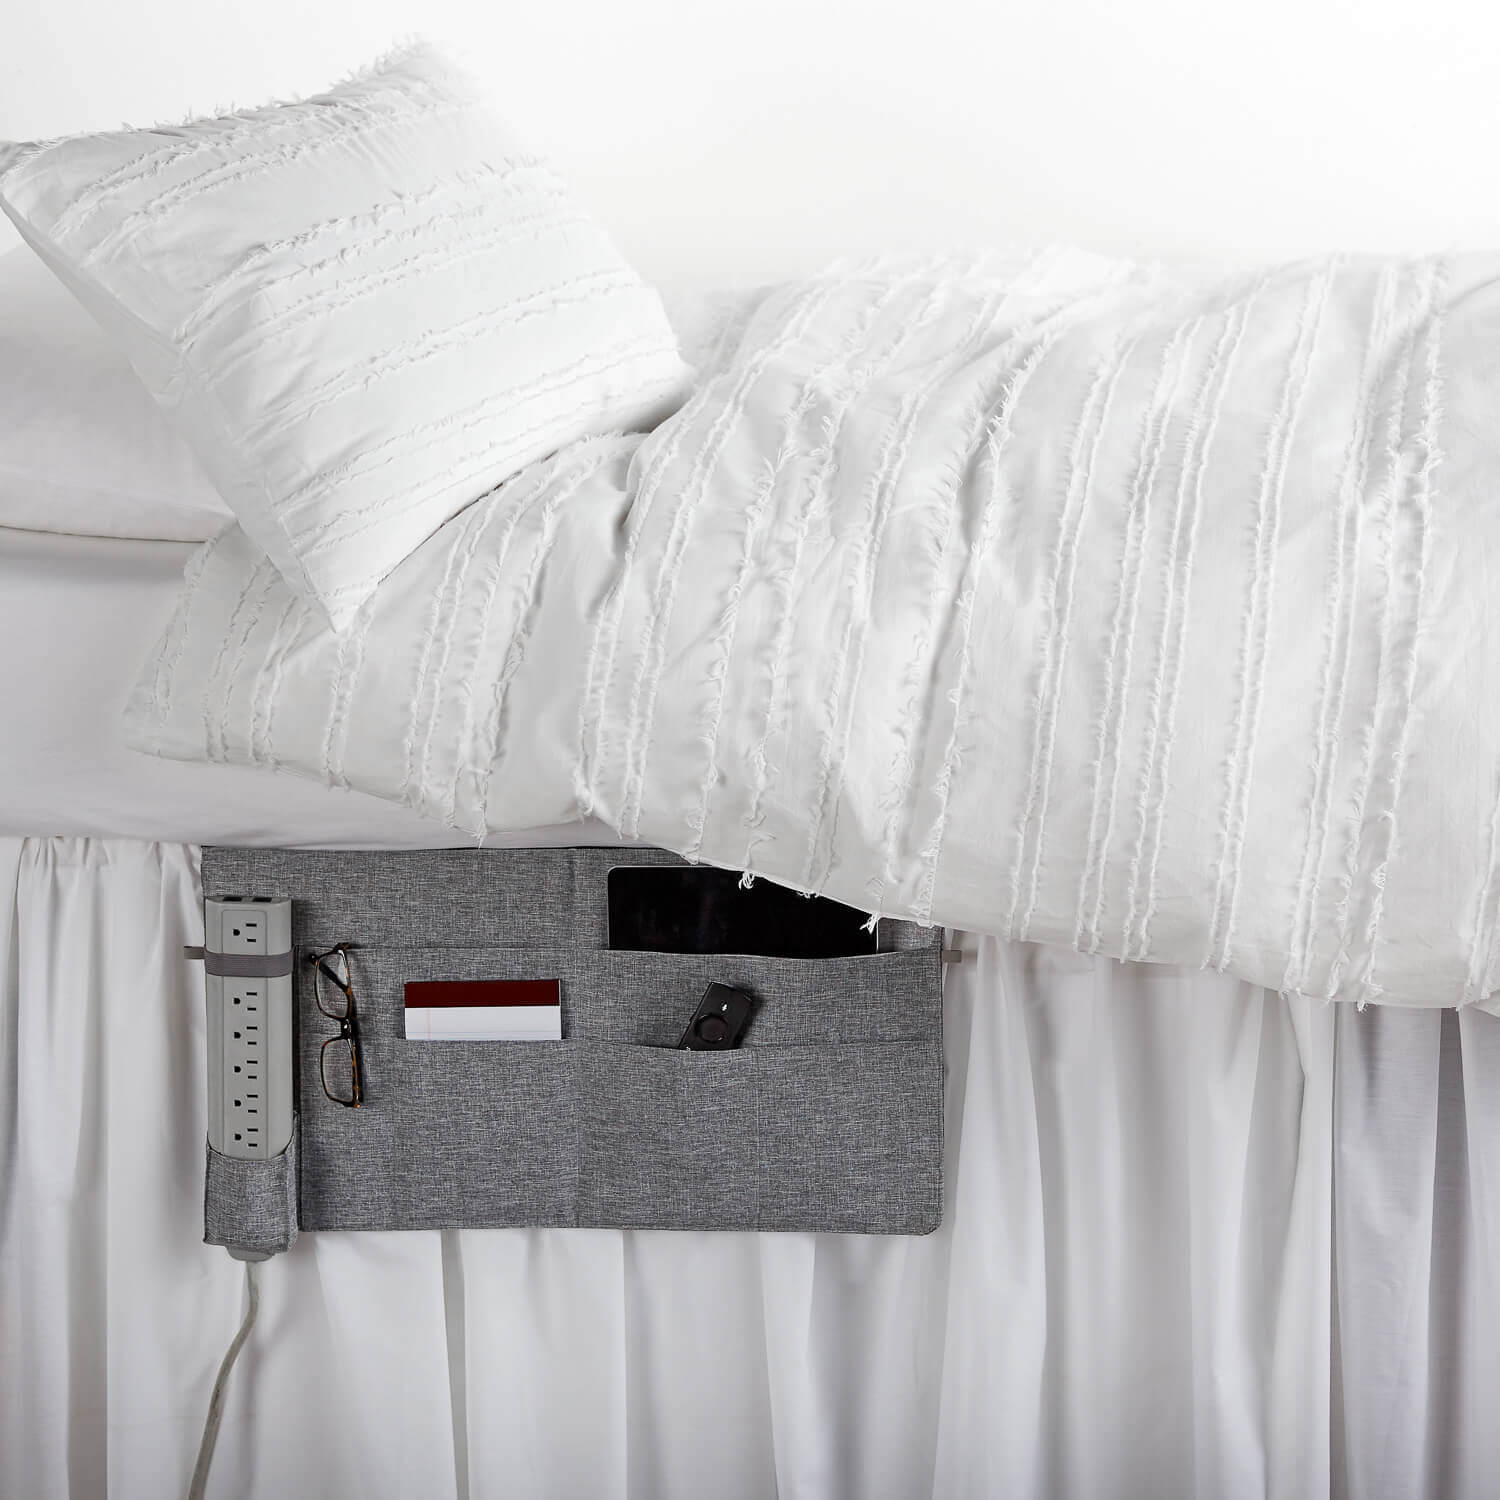 How To Make A Bed Caddy